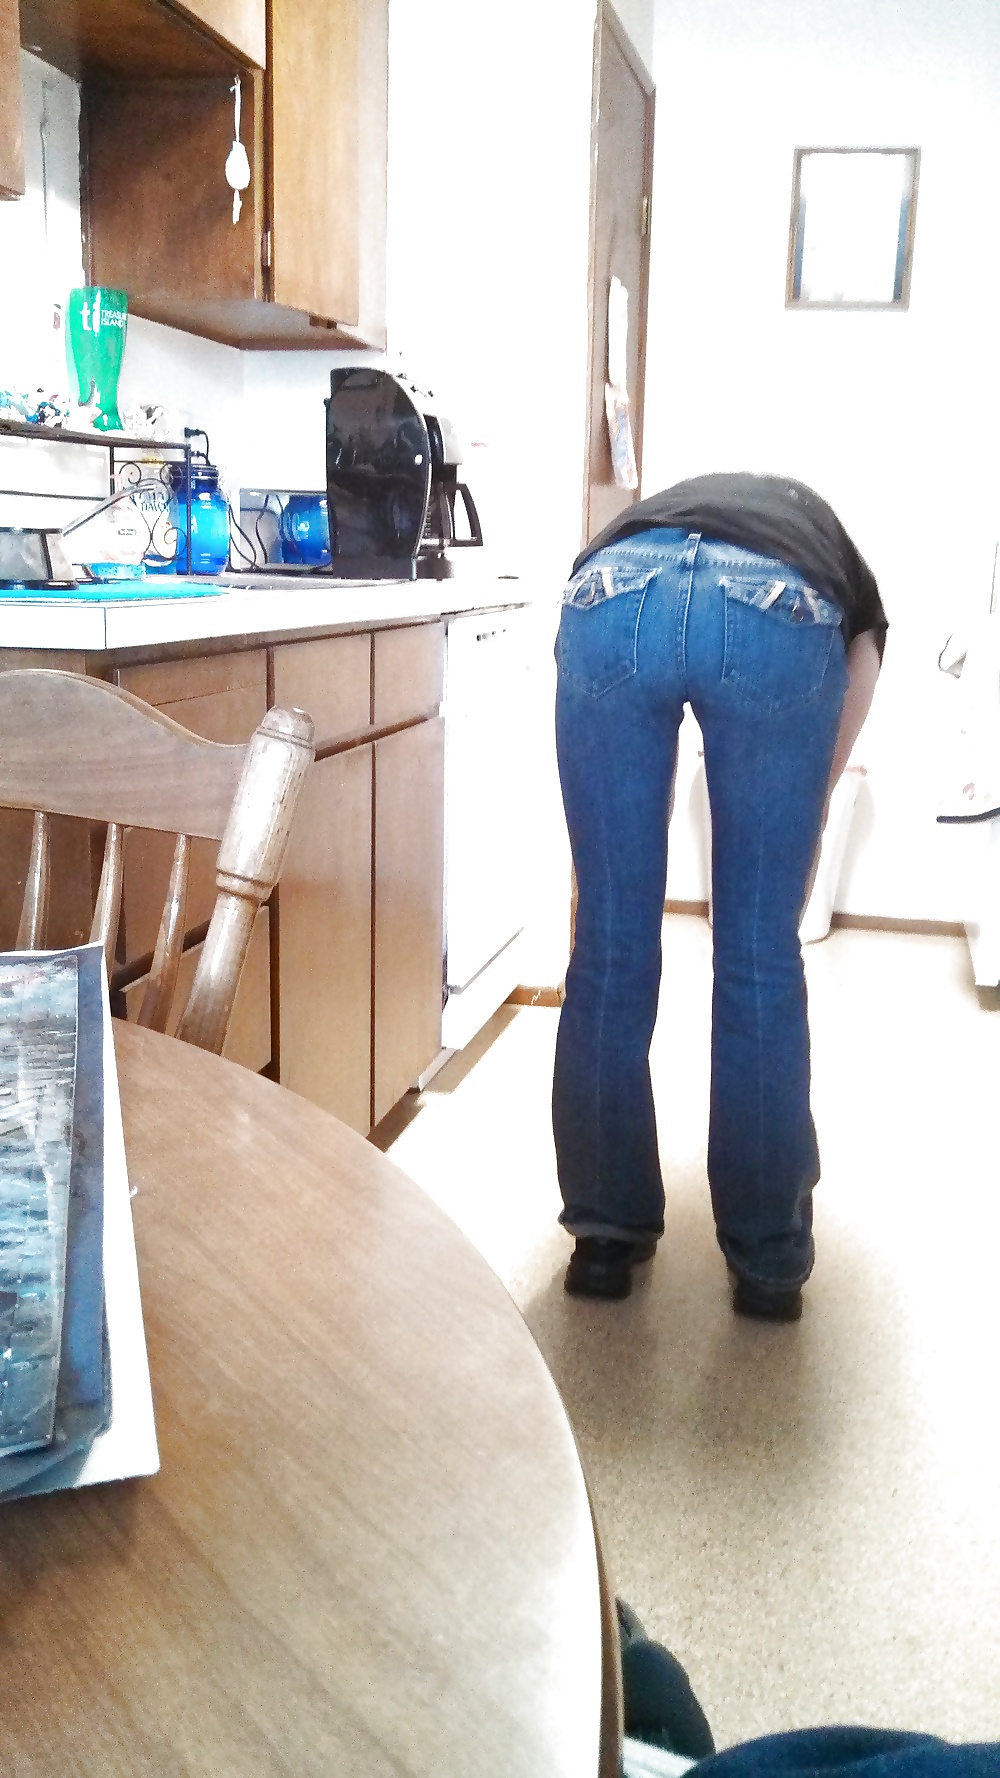 My wife's Hot Ass in Tight get your cock hard Jeans. #40124313